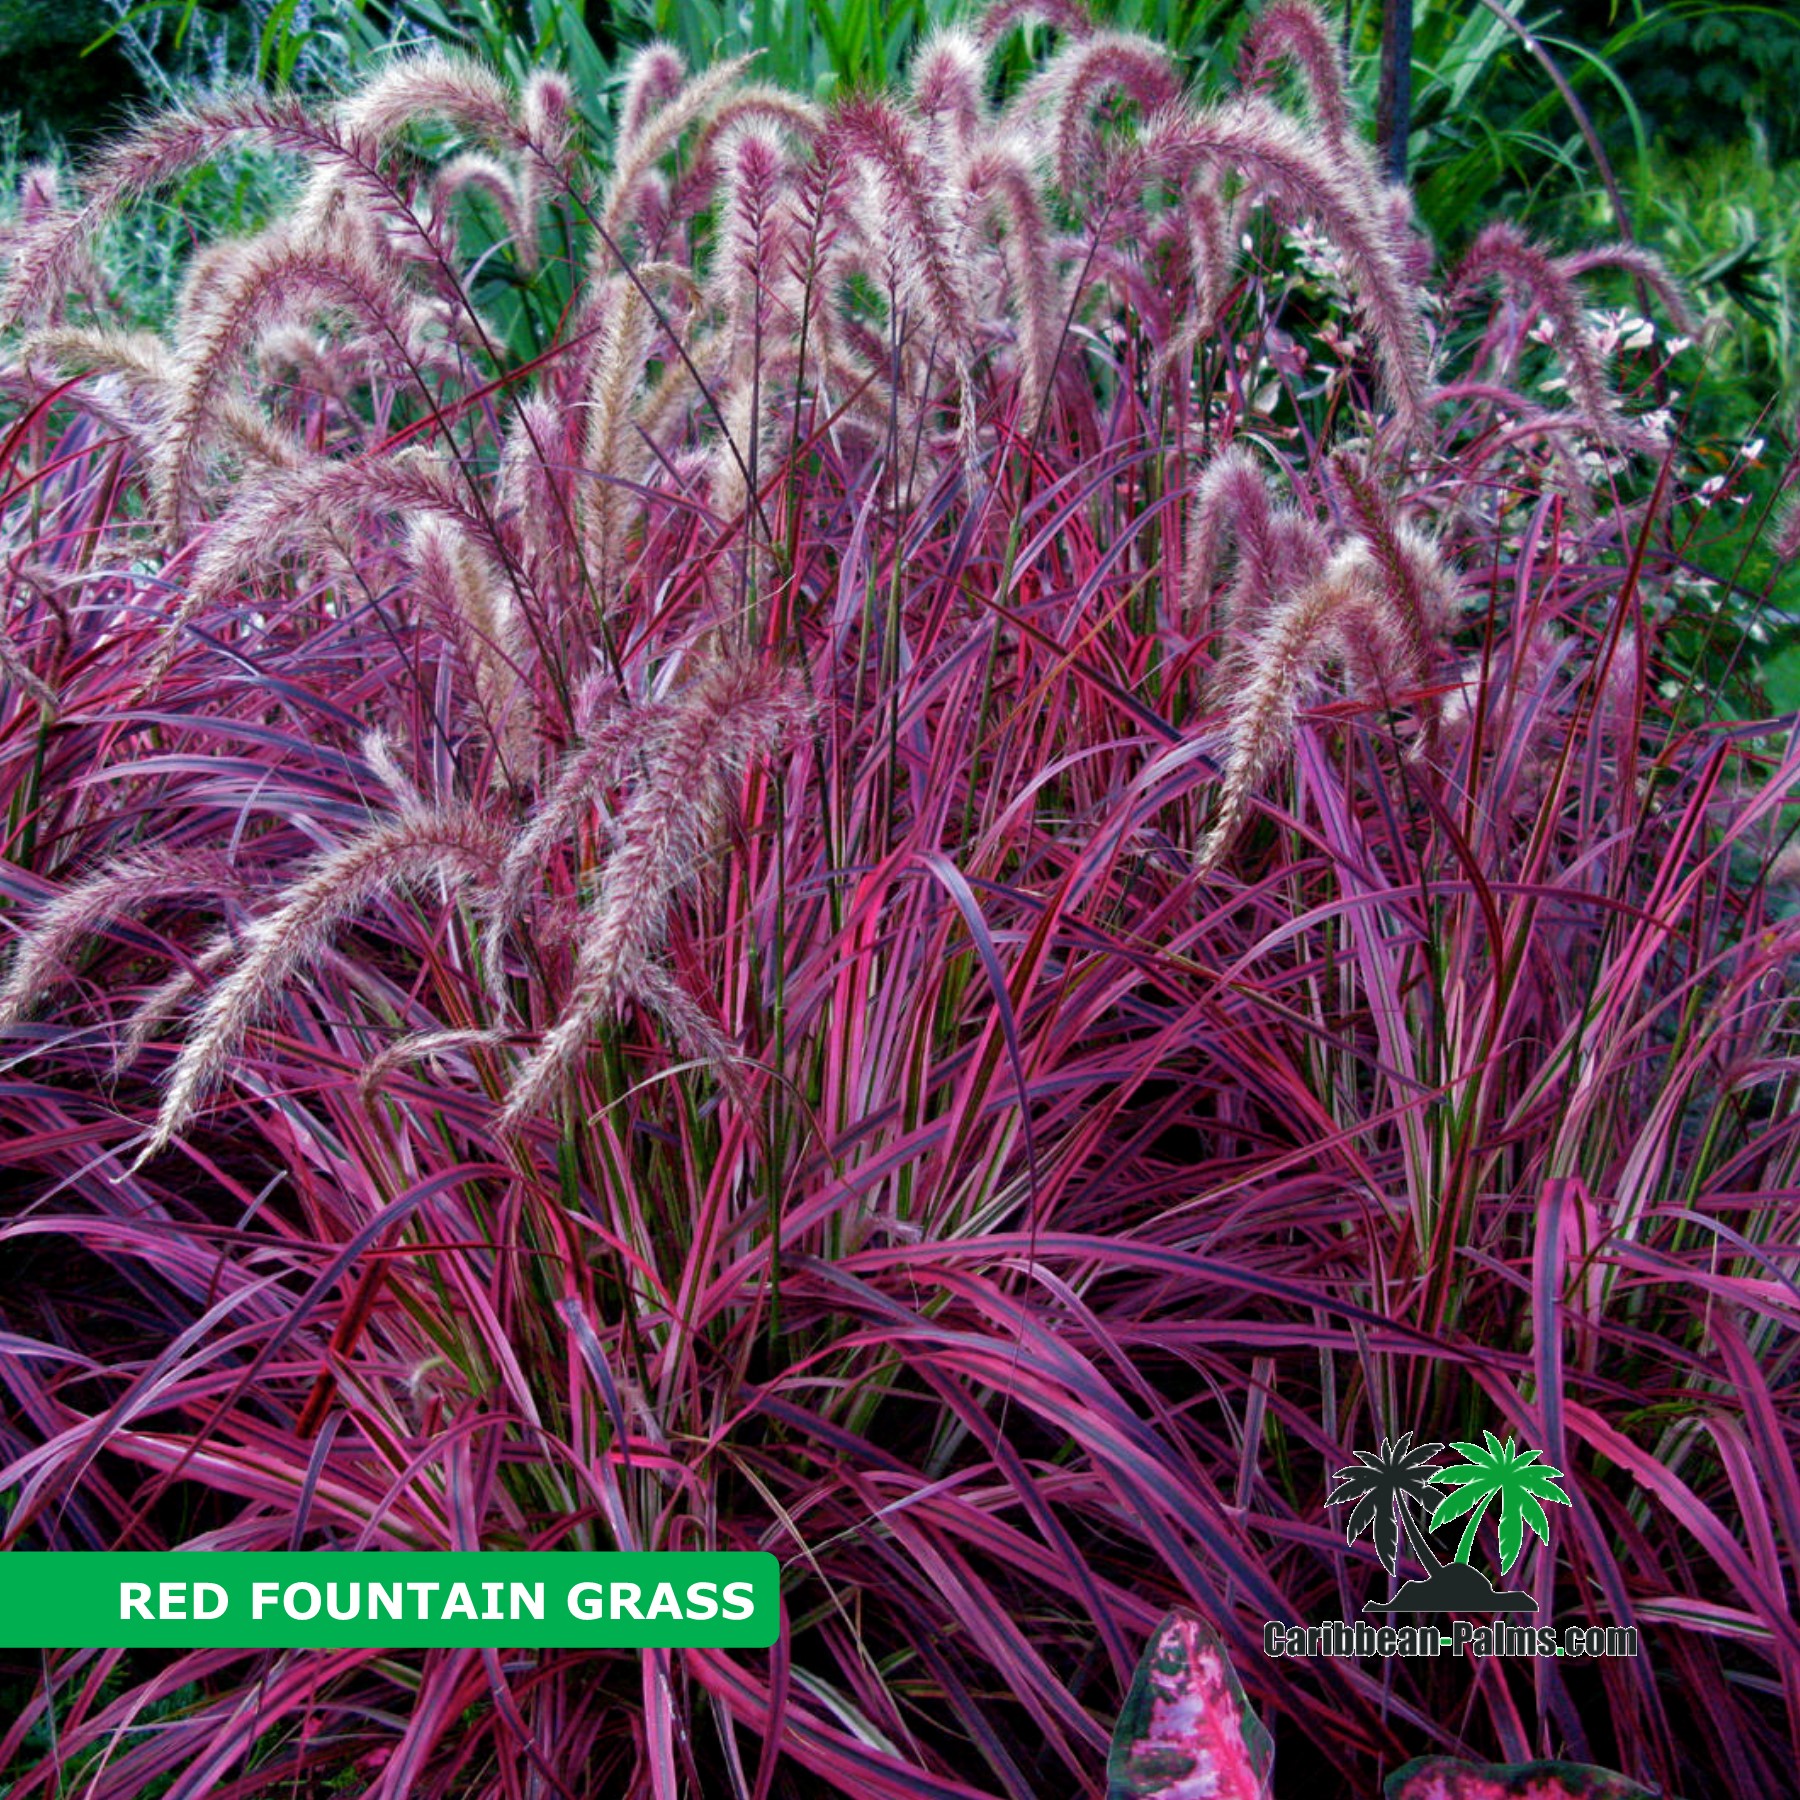 RED FOUNTAIN GRASS